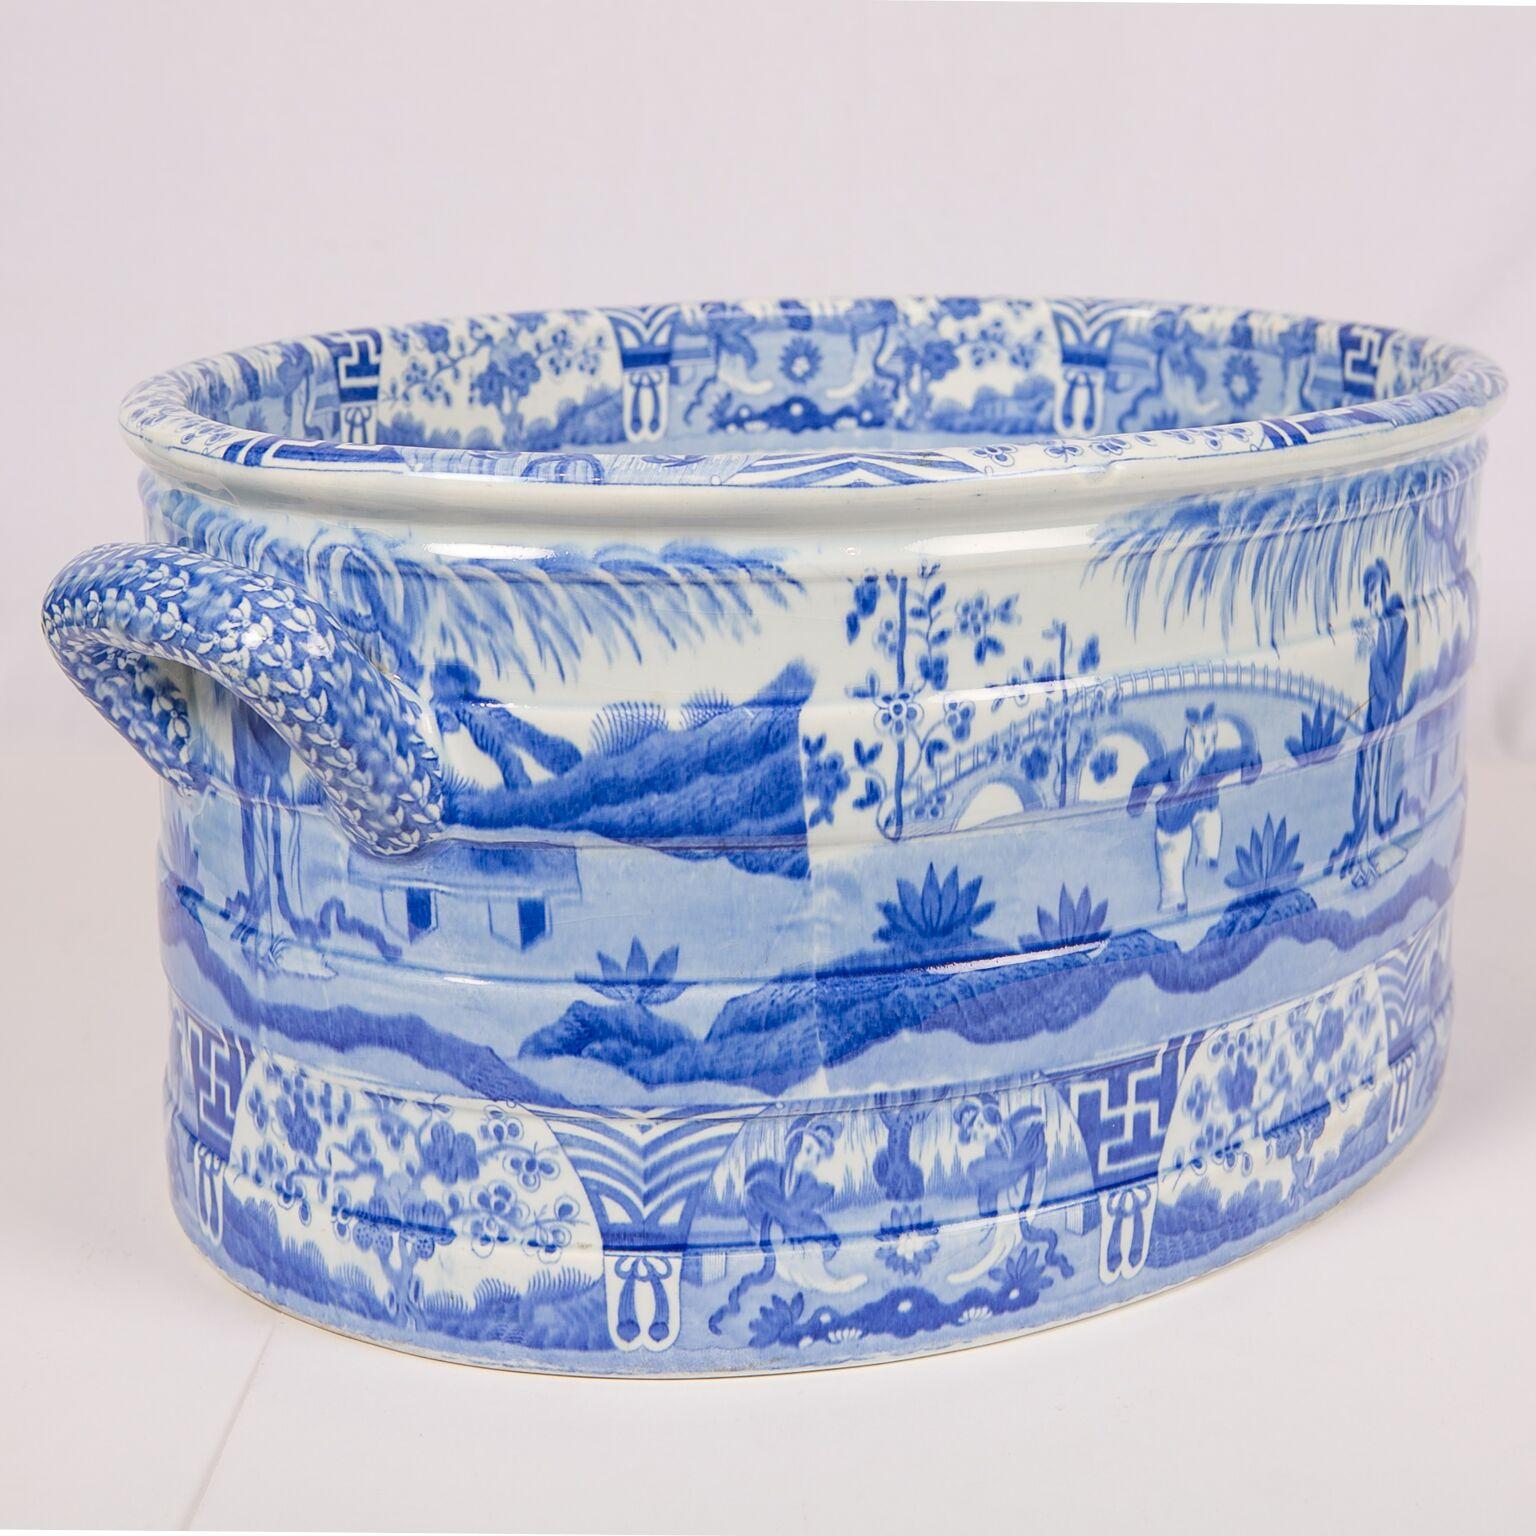 English Blue and White Footbath Made by Spode in Chinoiserie Style Circa 1820